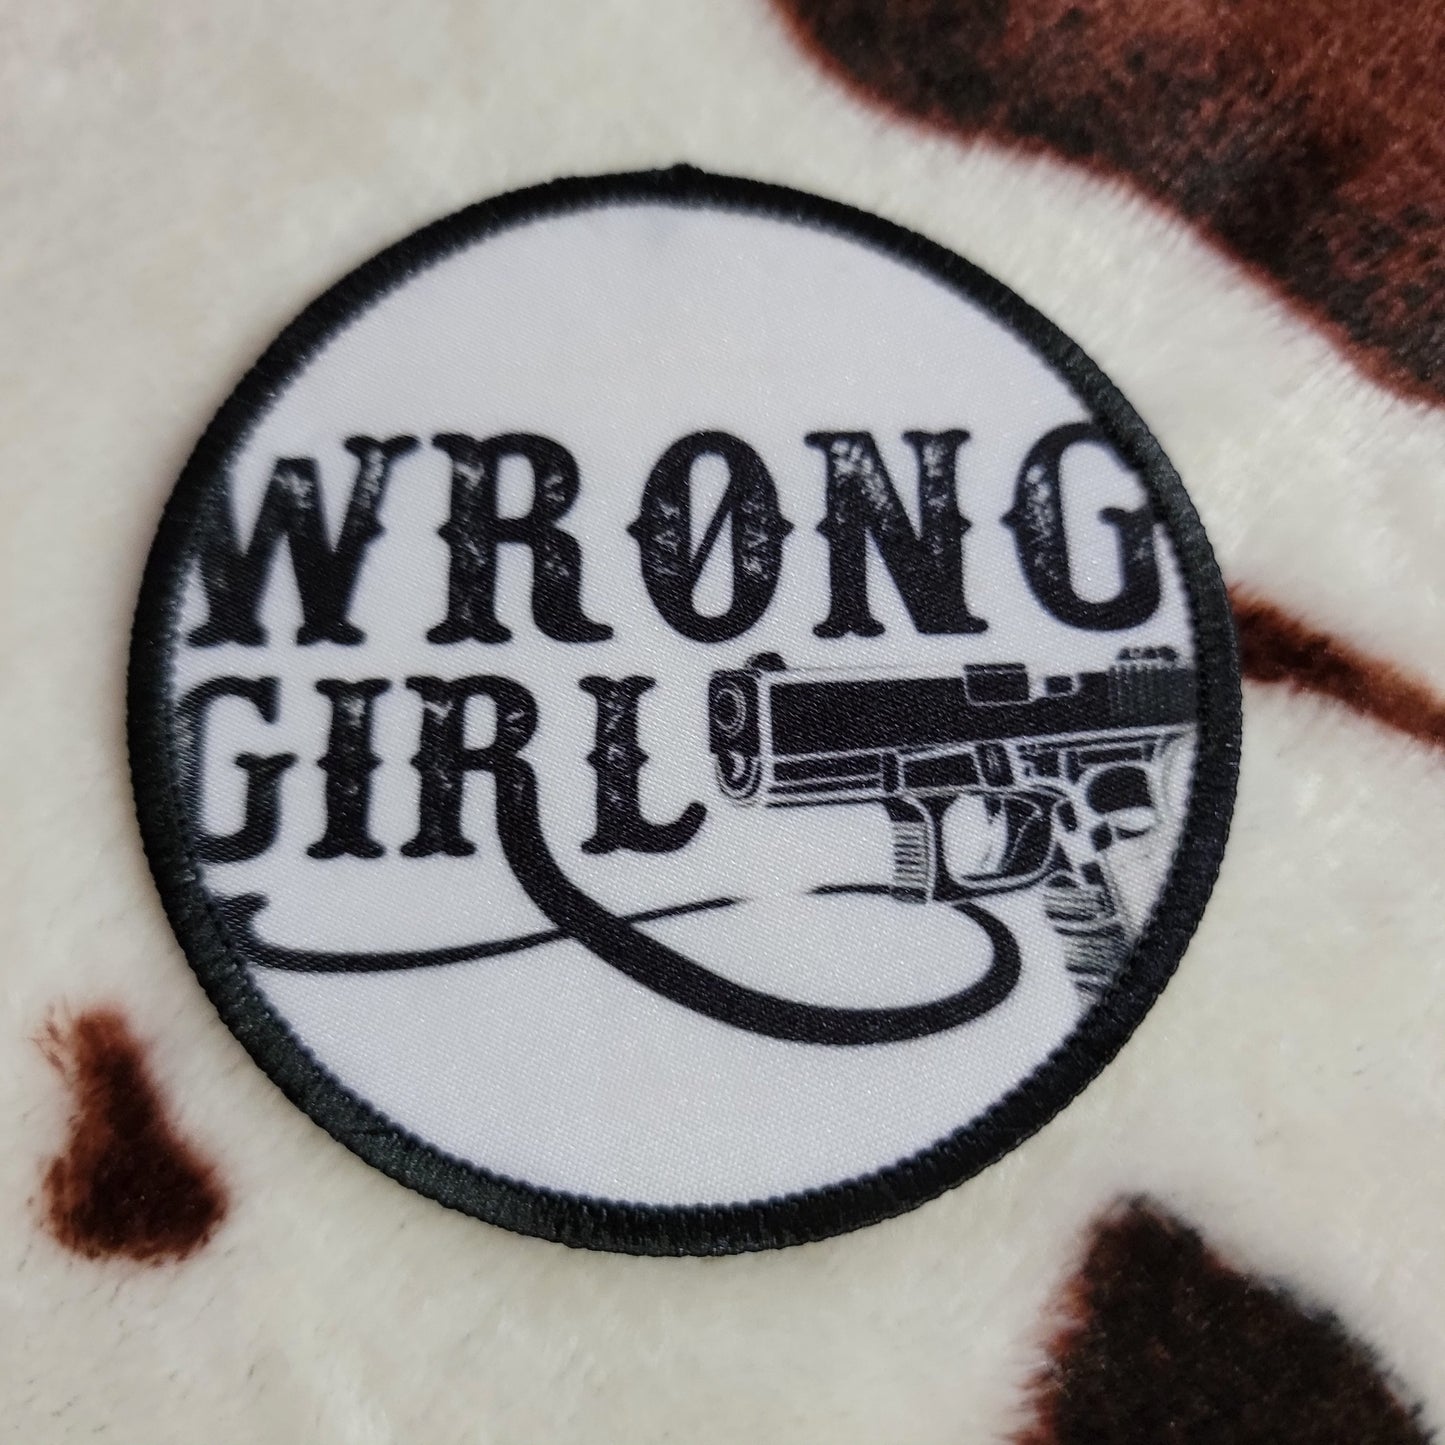 Wrong Girl Western Hat Patch